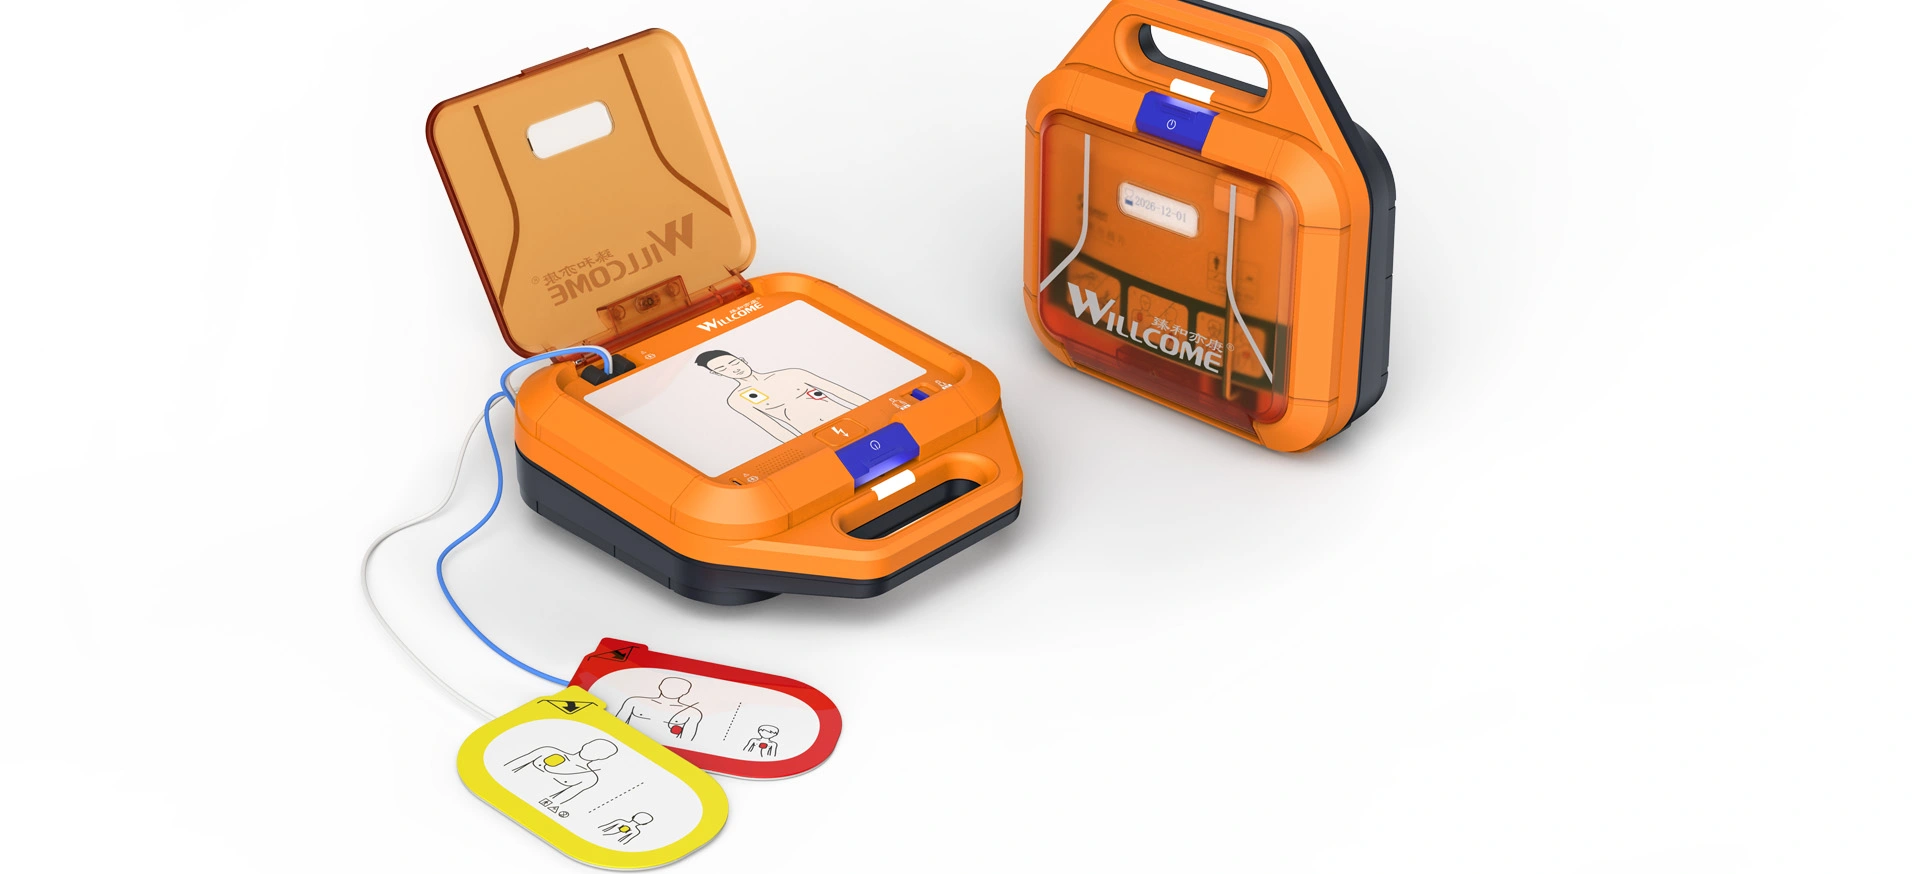 What Are the Advantages of First Aid Equipment?